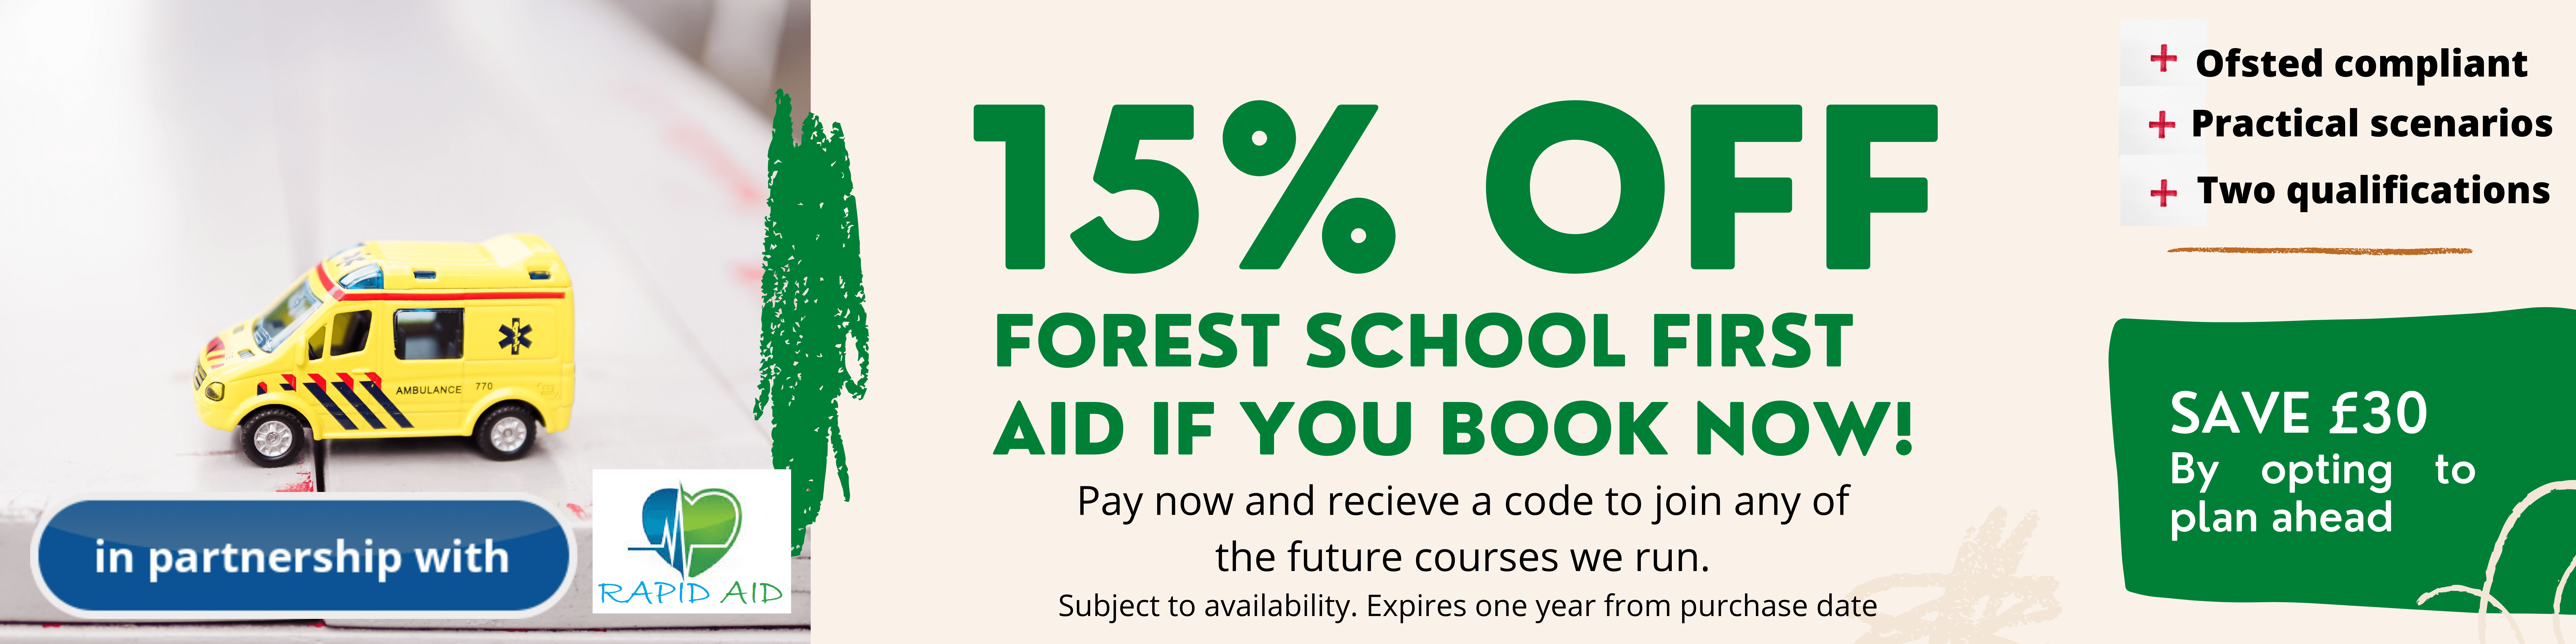 FirstAid_discount Forest School Leader Training - November 2021